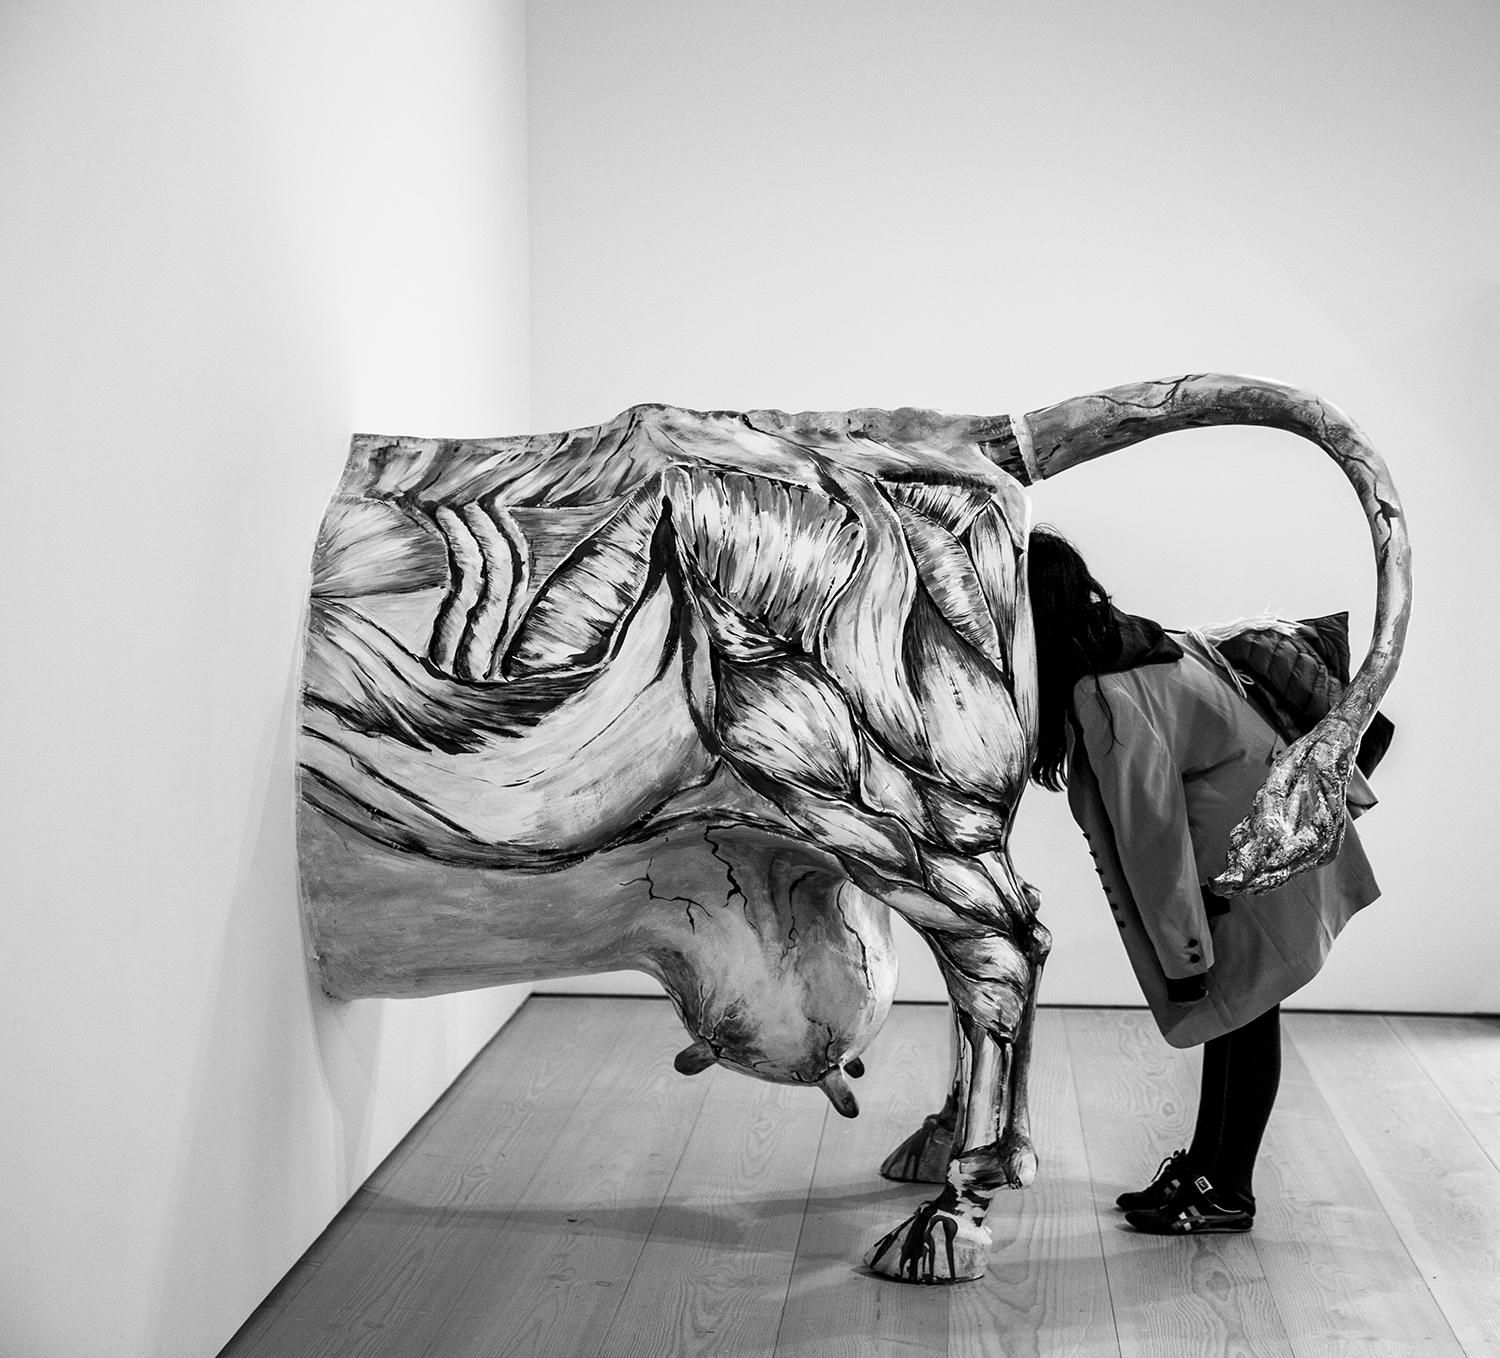 Edition of 5
signed and numbered by the artist

A women looks in to a plastic of a cow. This photo was taken in a Museum in Berlin.

JJK is a pseudonym for one of the world's most successful photo artists.
In his series "Always in my mind", he